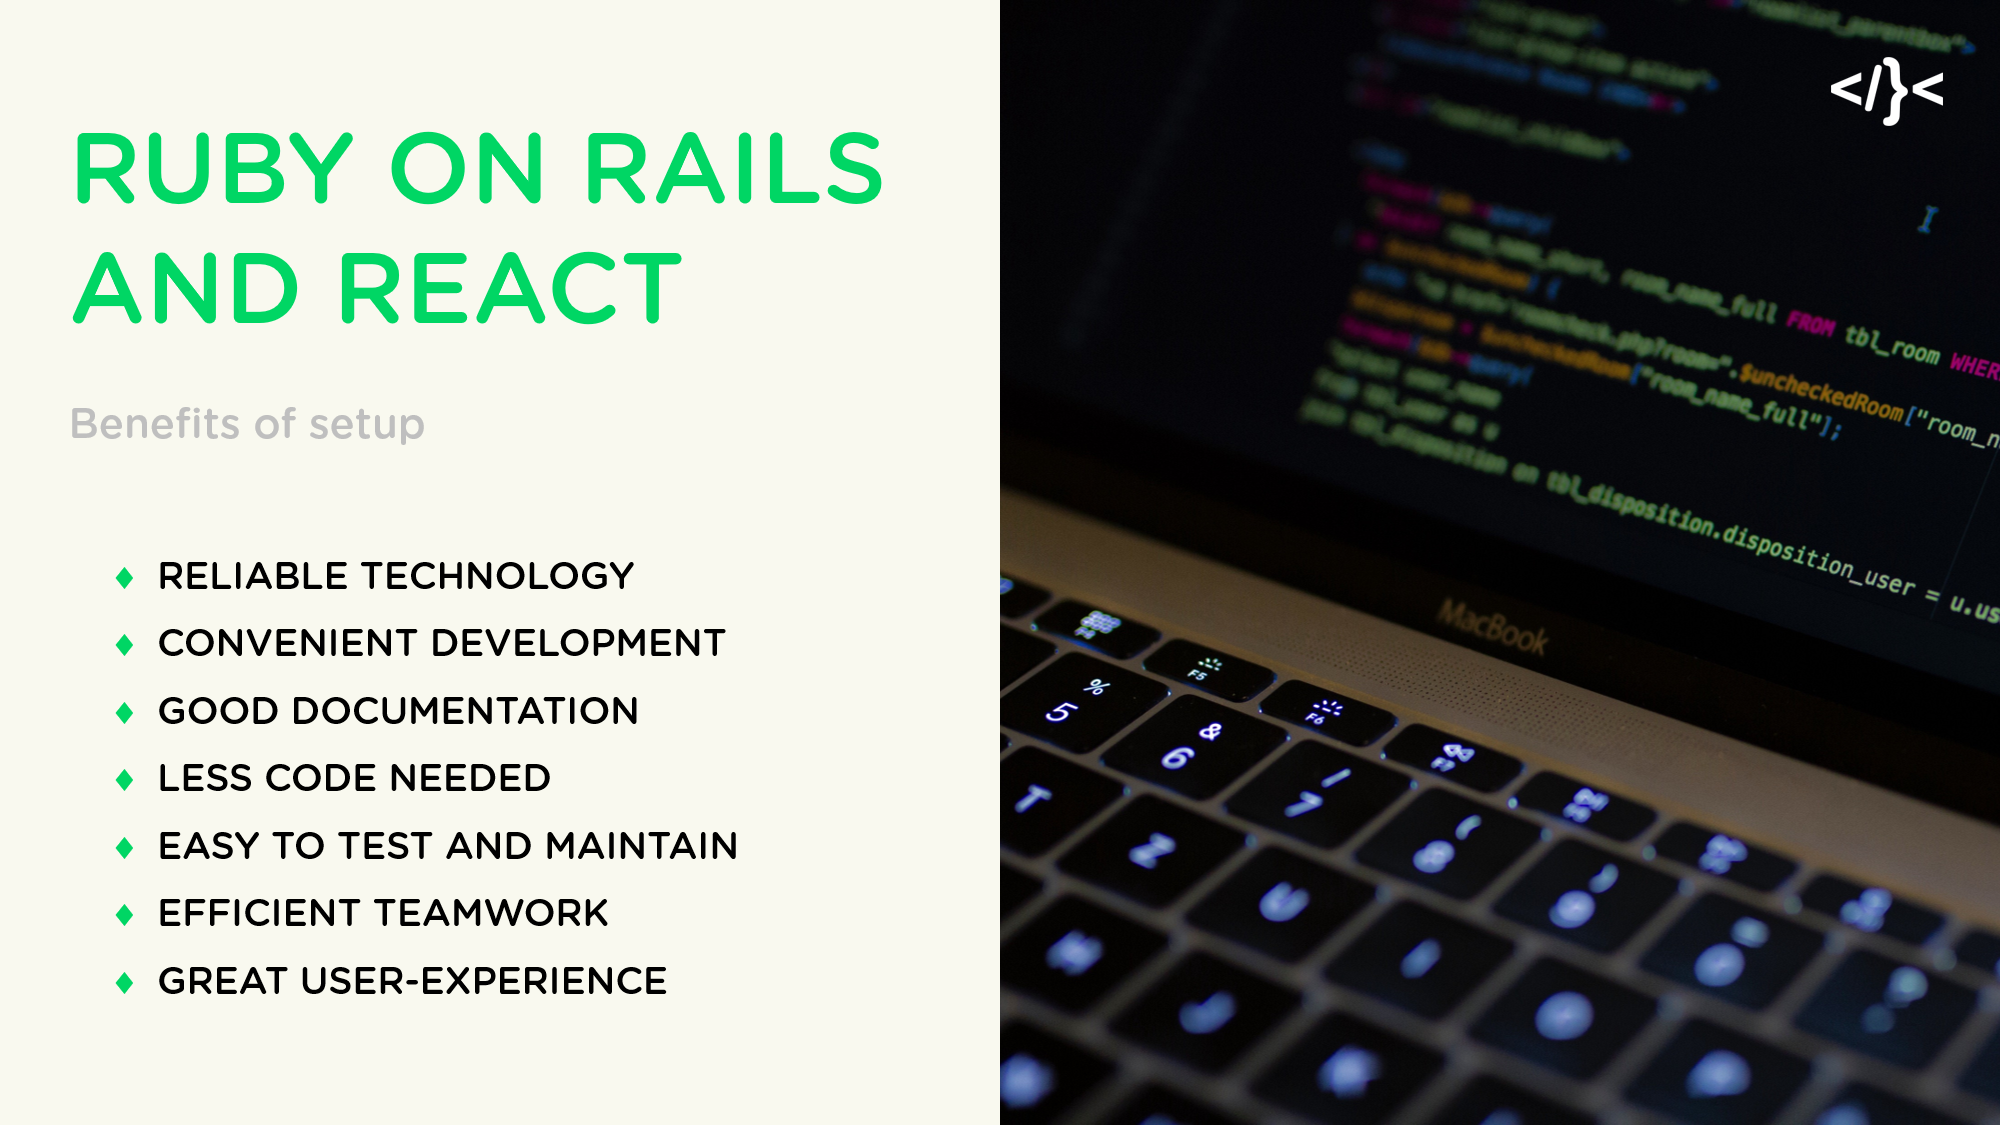 Ruby on rails and react.jpg